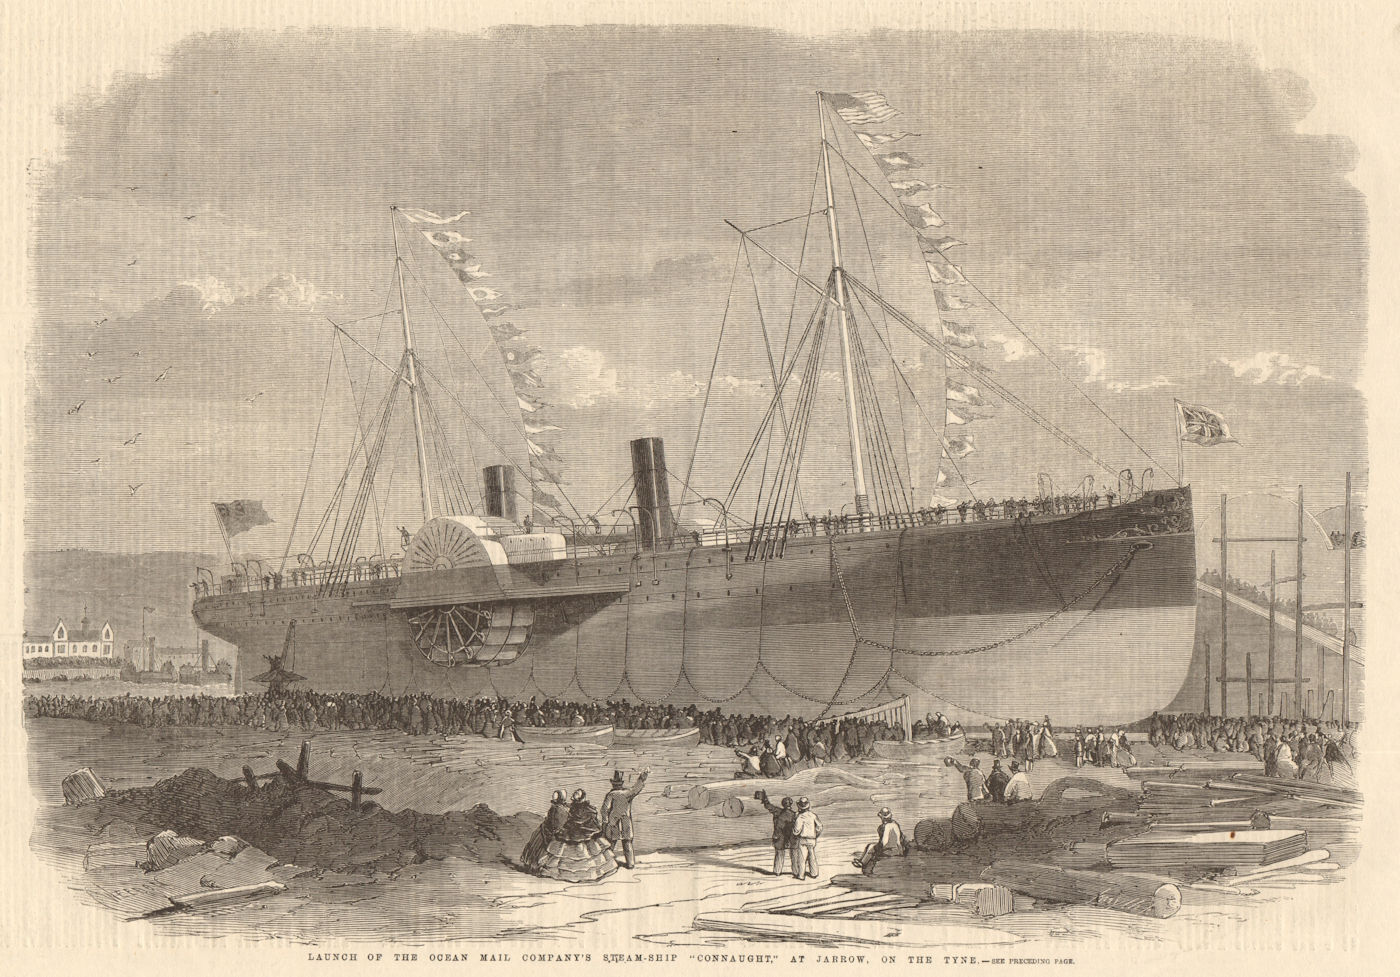 Launch of the Ocean Mail Company's steam-ship Connaught at Jarrow, Tyneside 1860